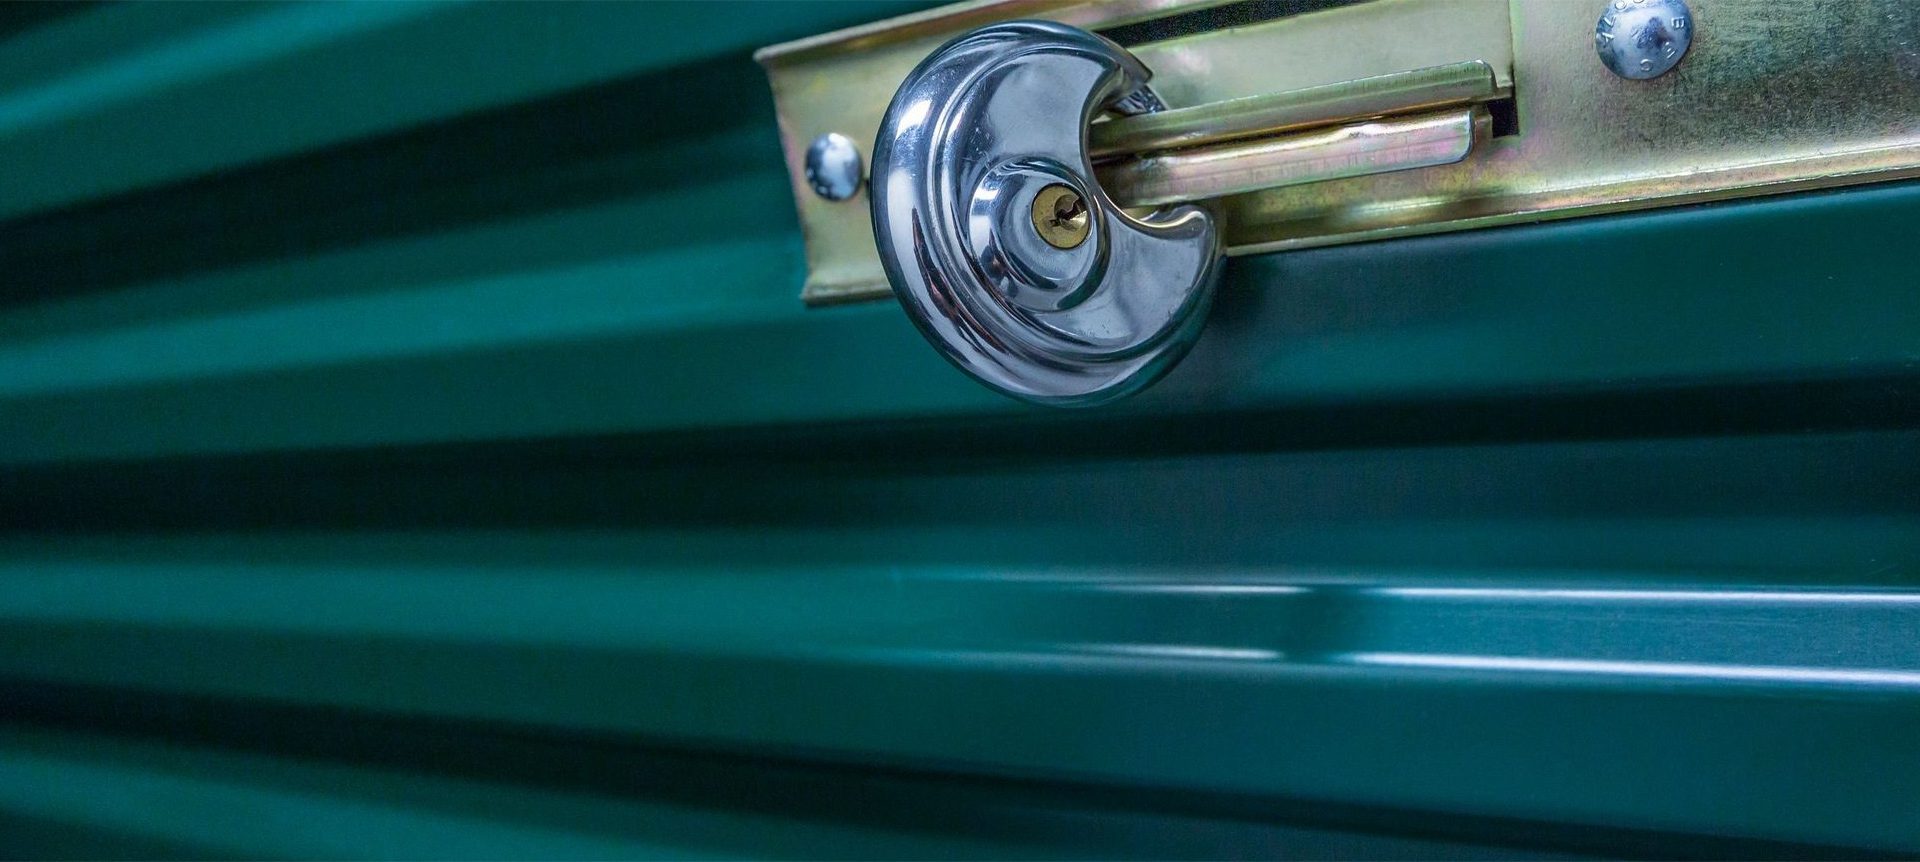 A close up of the key on a green door.